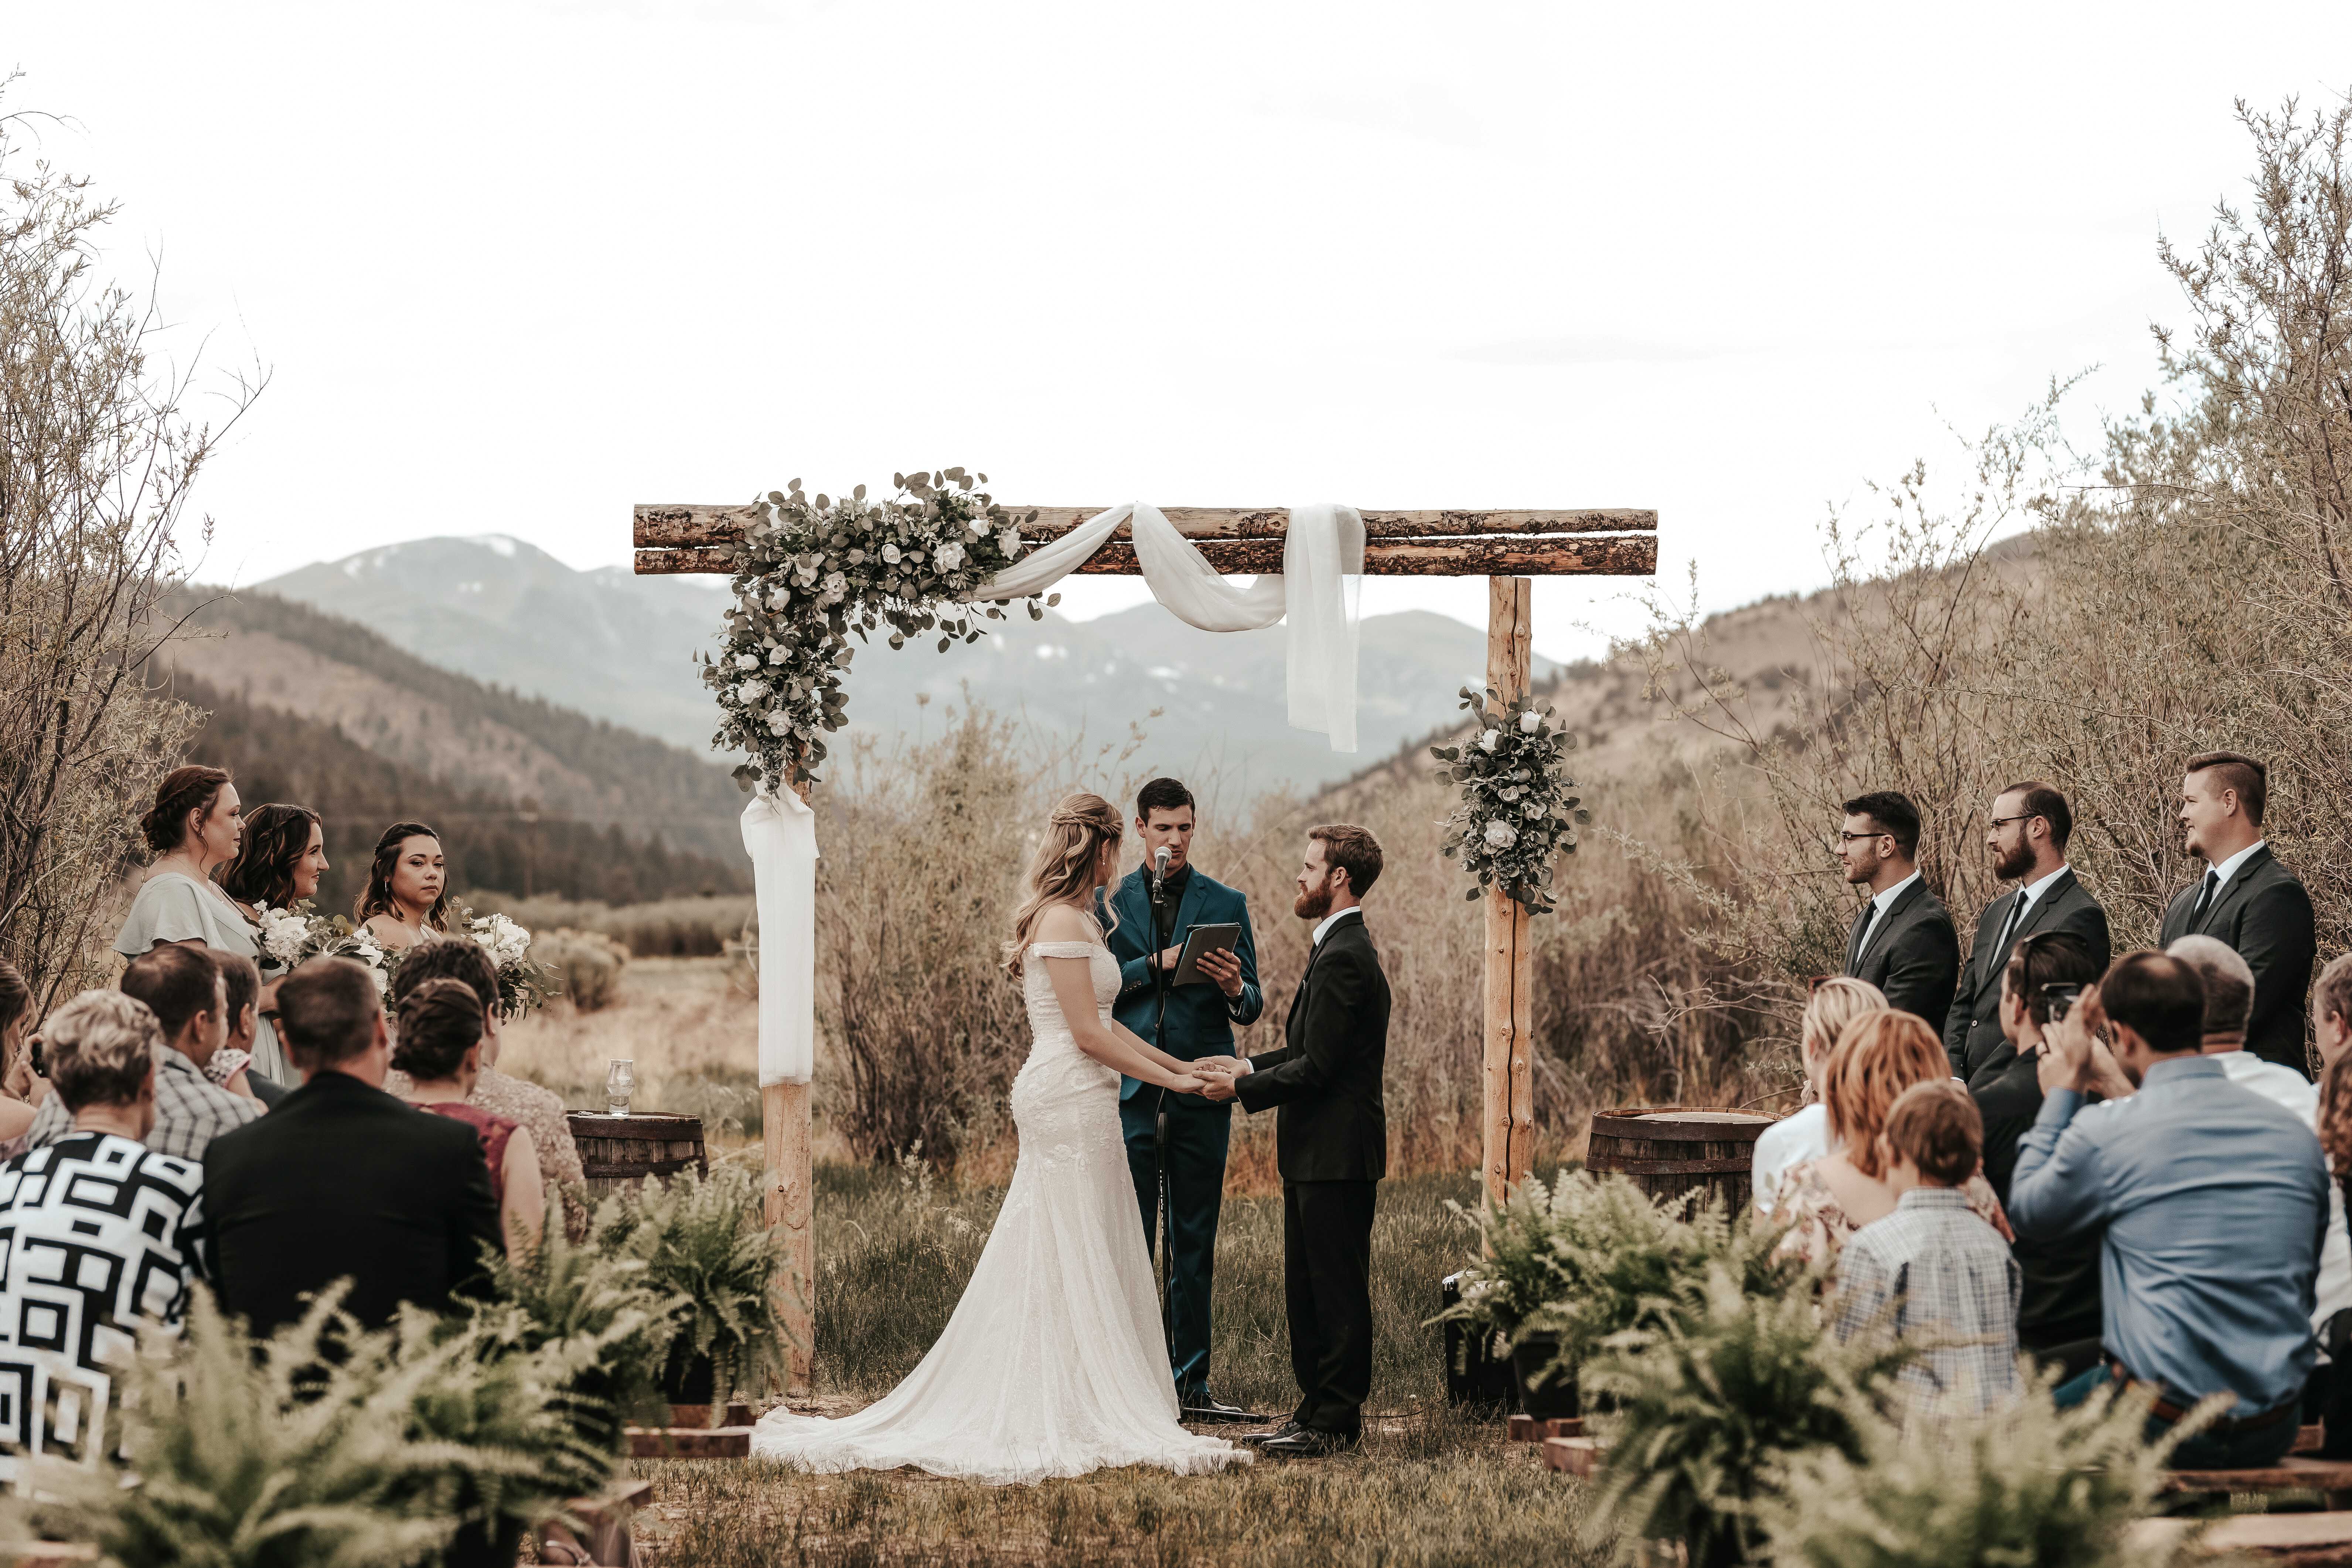 A couple getting married at The Colorado Retreat Co.